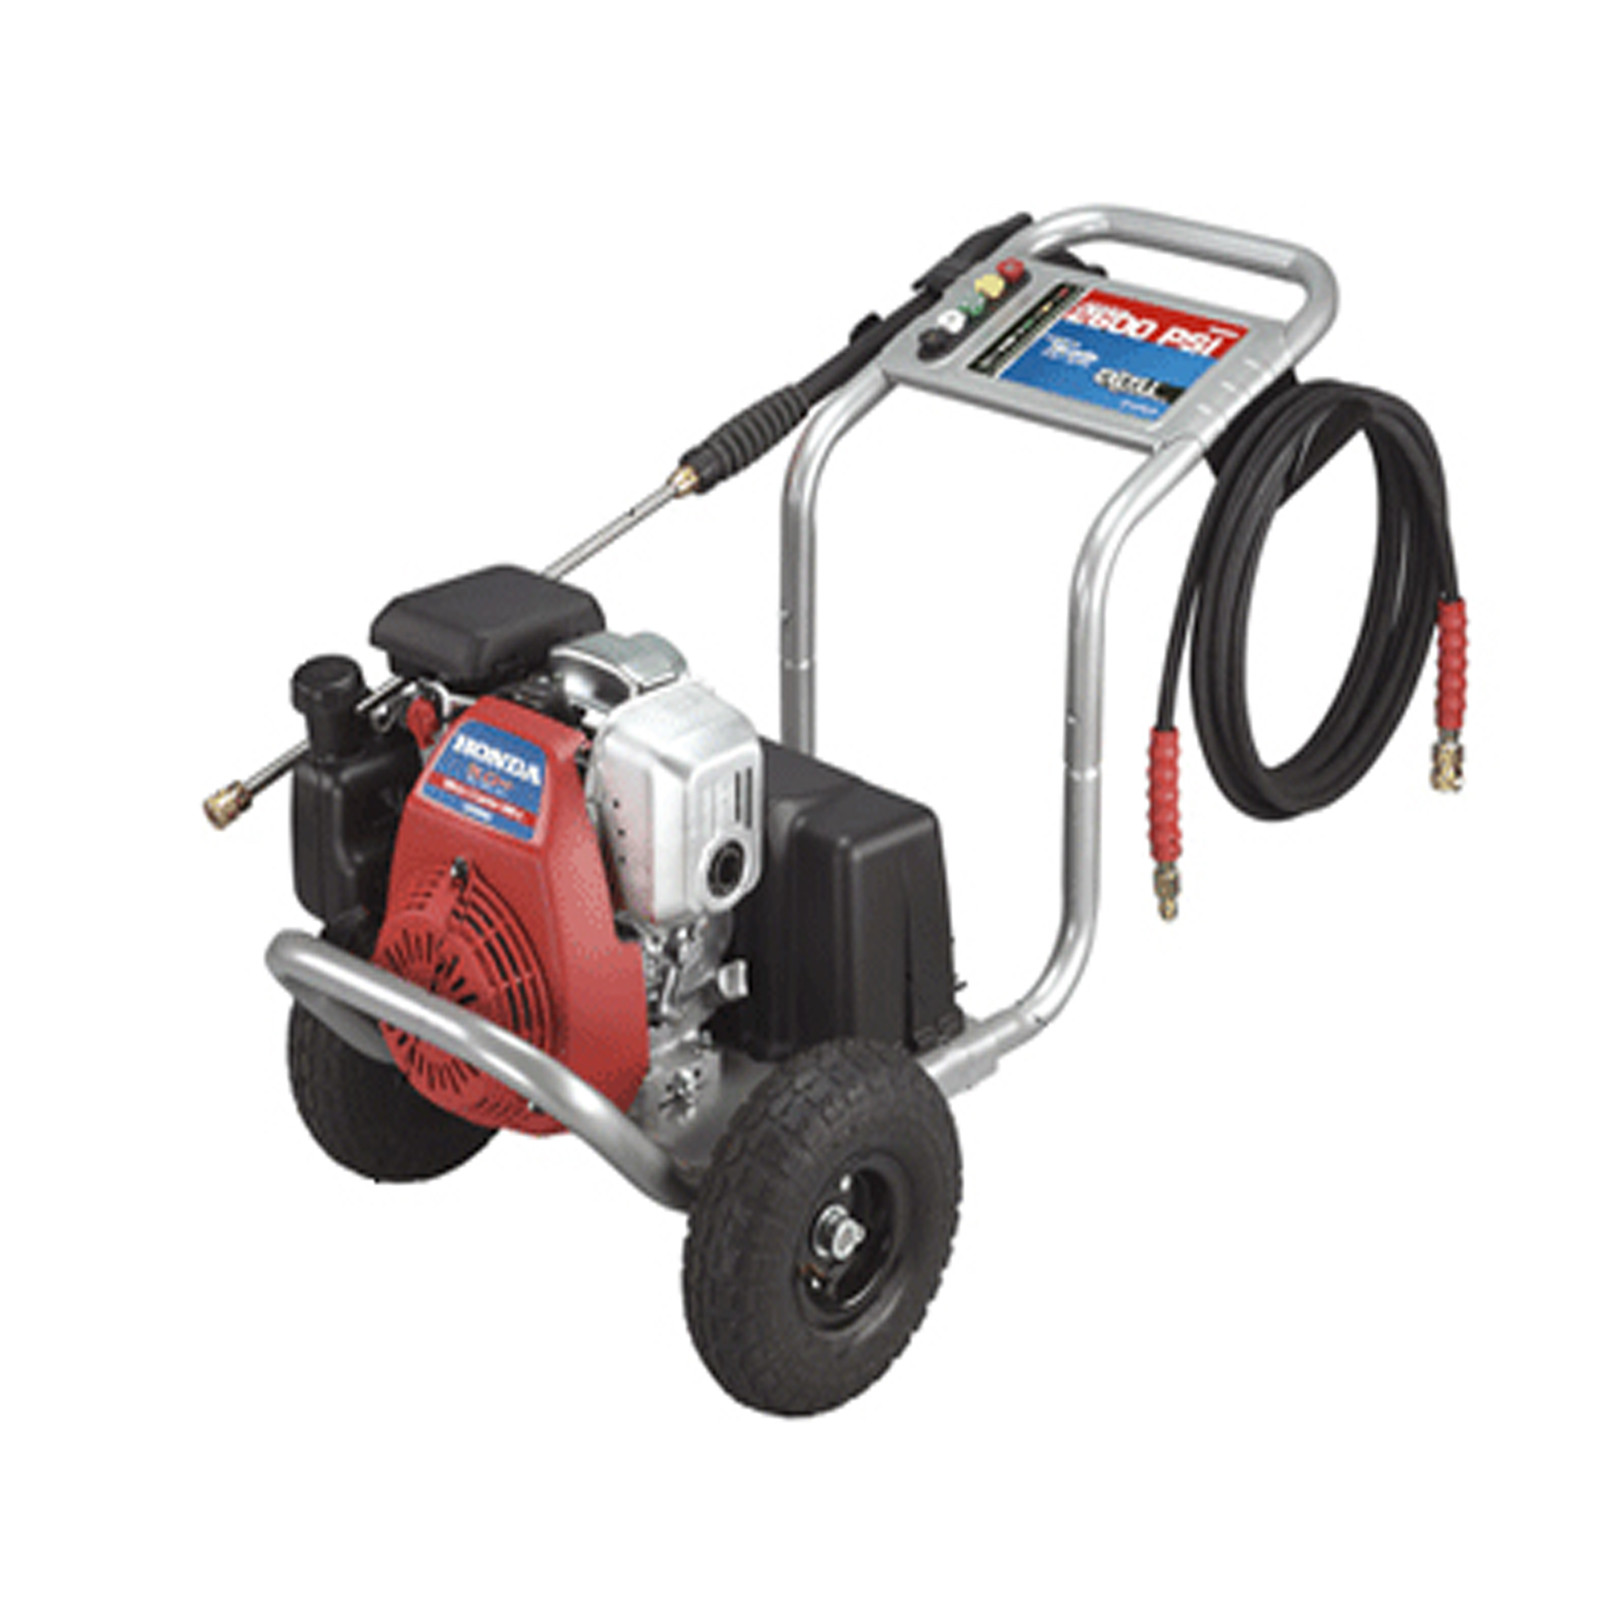 Excell Vr2500 Pressure Washer Engine Manual